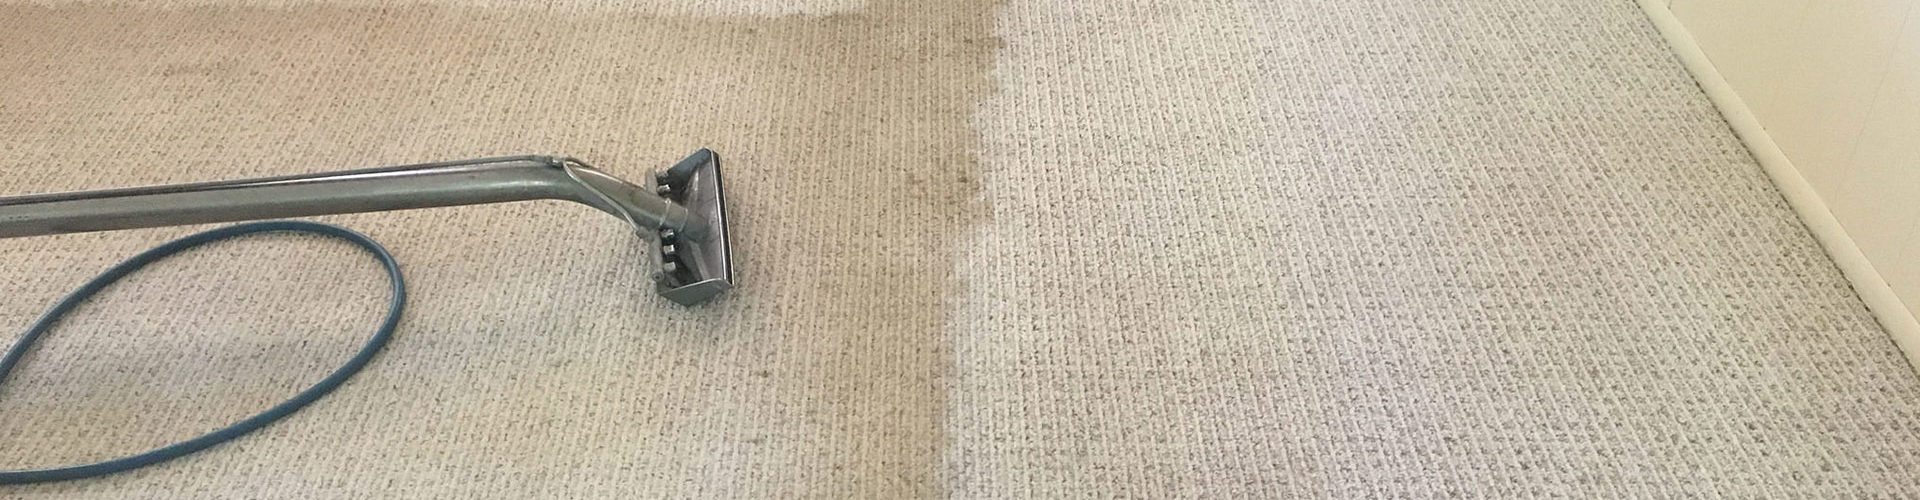 Why Dirty Carpets Can Be a Health Hazard?